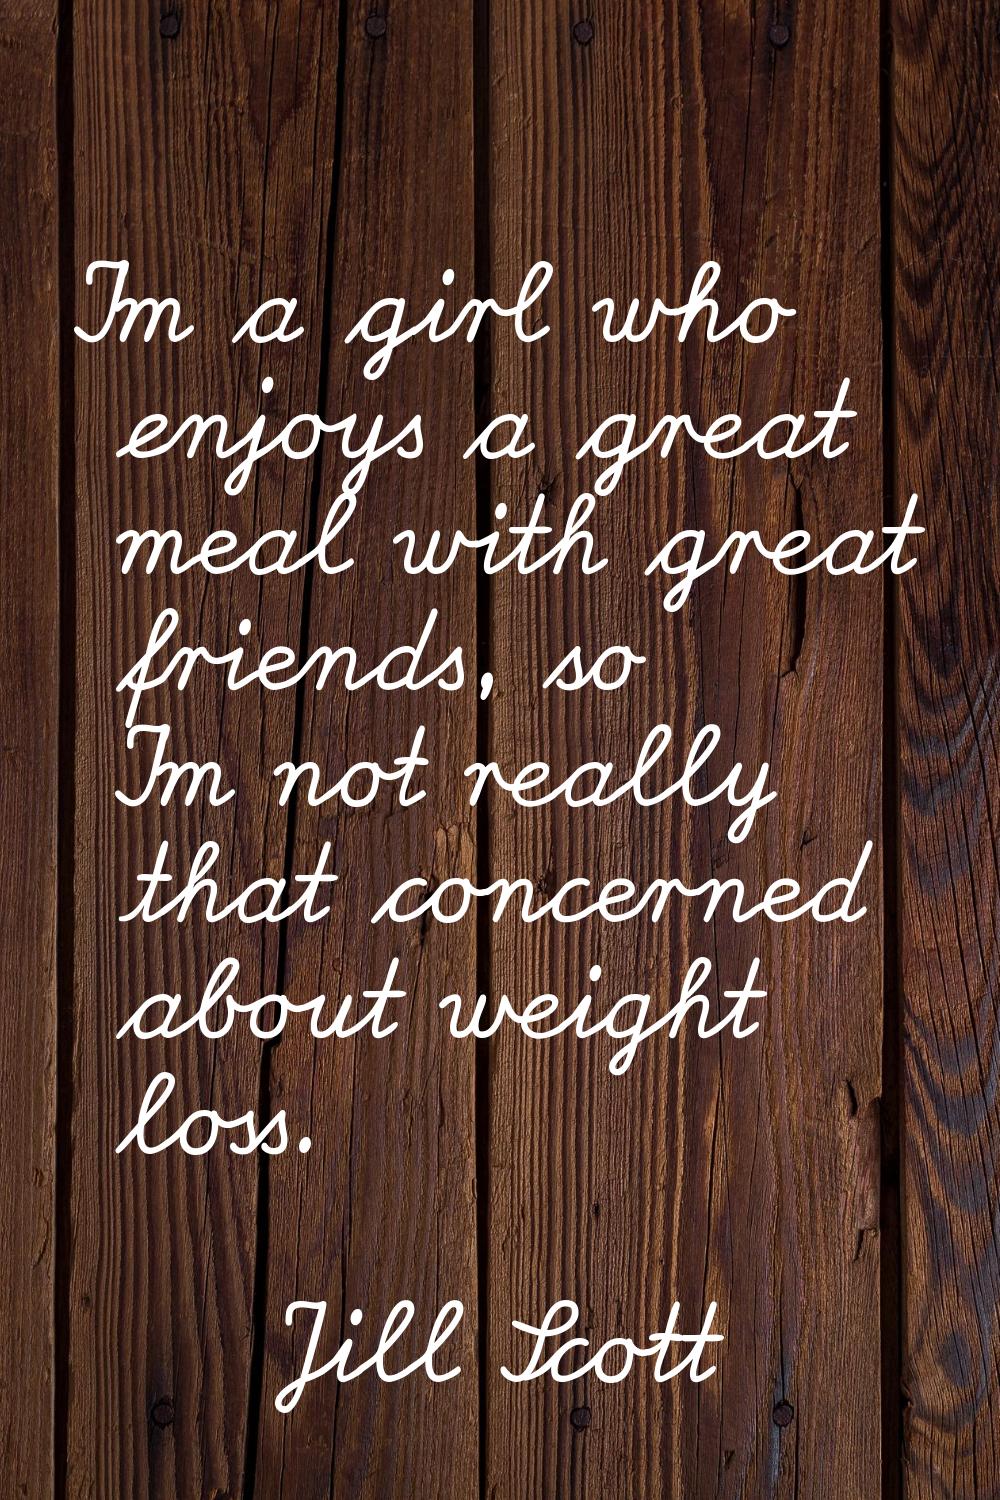 I'm a girl who enjoys a great meal with great friends, so I'm not really that concerned about weigh